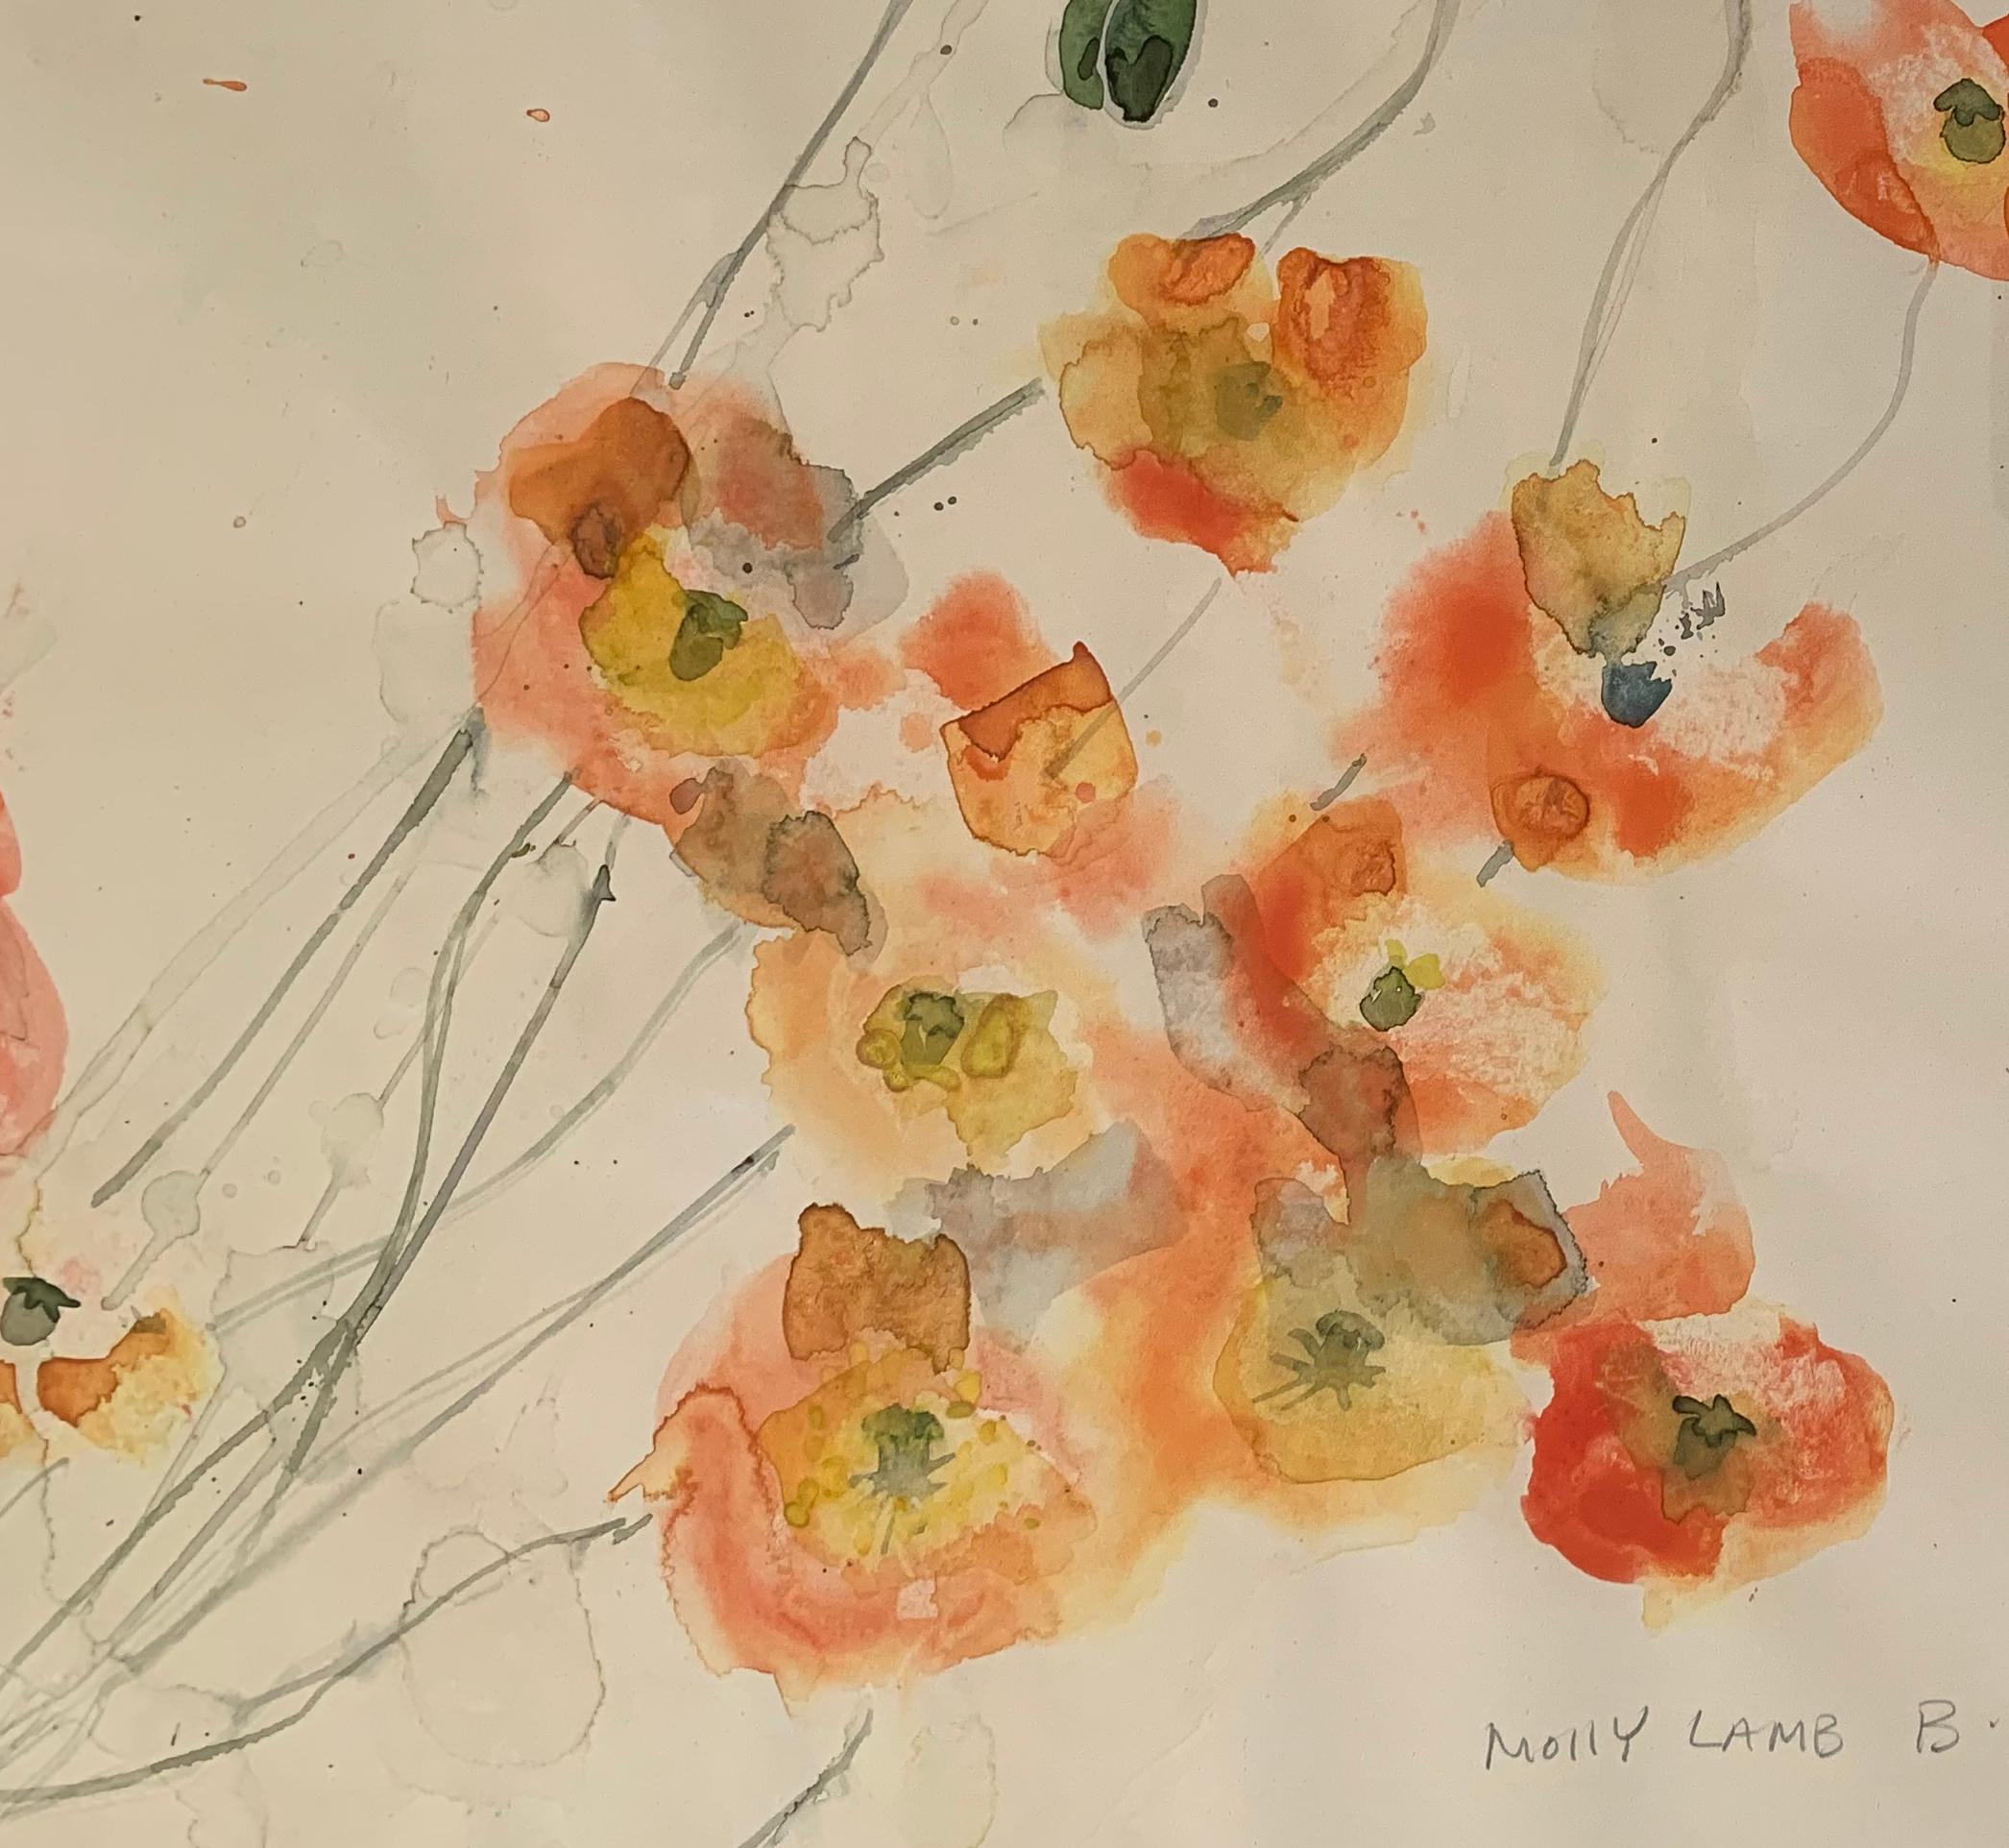 Molly Lamb Bobak, Canadian, 1920 – 2014
Poppies
Watercolour
17 x 24 in
signed
PROVENANCE: Galerie Walter Klinkhoff, Montreal

framed


Molly Bobak Biography
(1922 - 2014) RCA
It could be said that Molly Lamb Bobak was destined to be an artist. She